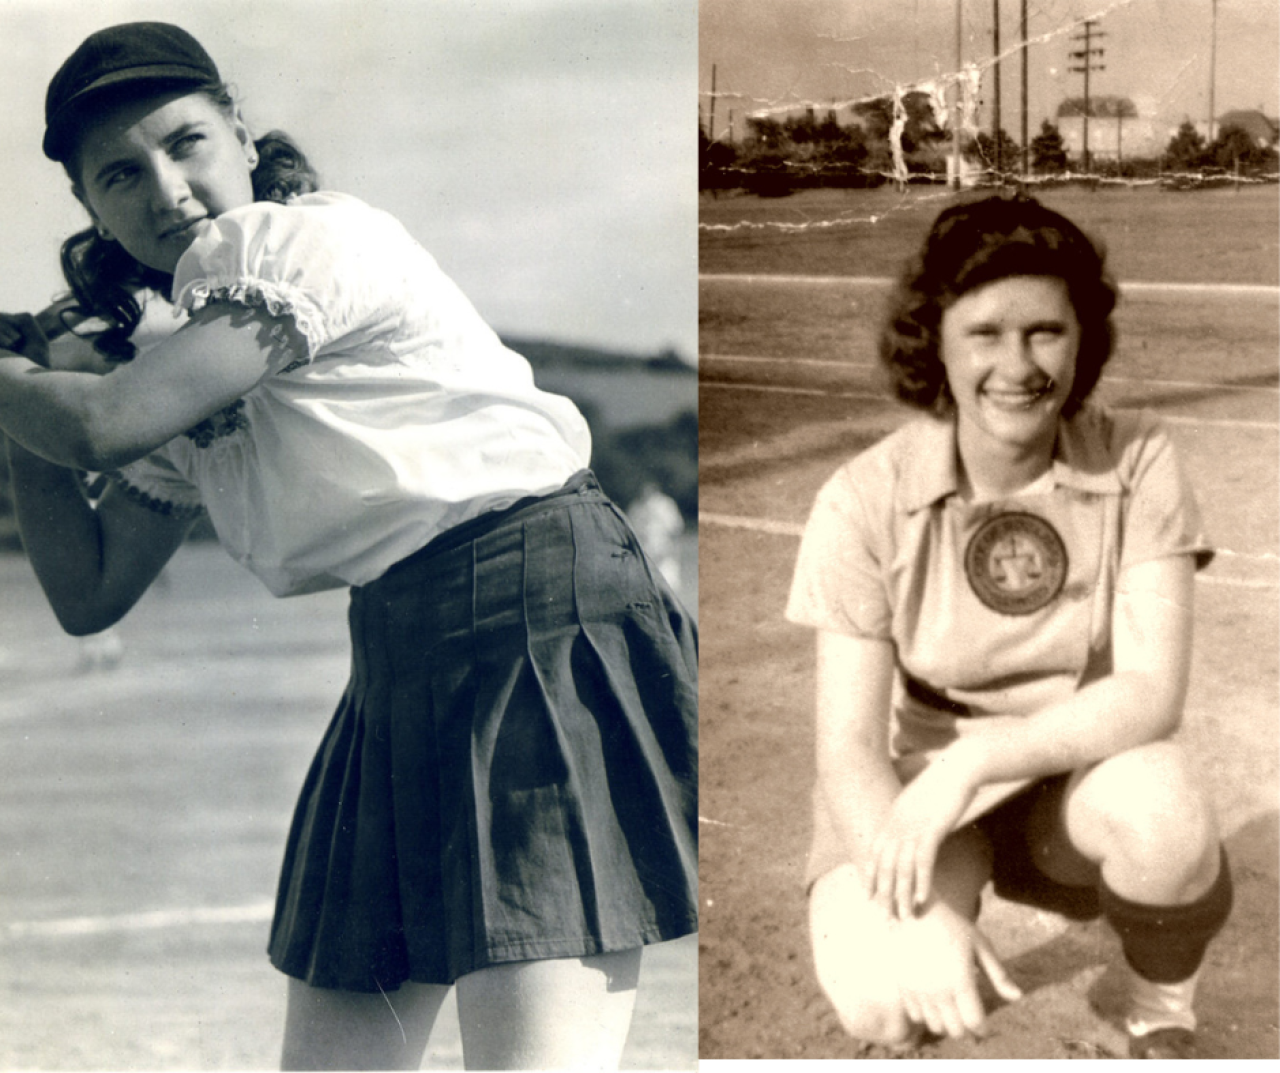 On the left is Dorothy Kovalchick c. 1945. The daughter of a Czech immigrant, Kovalchick grew up in coal country in Armstrong County. Pictured here in her “Kovalchick” team uniform, she played for her father for eight years, drawing fans wherever she went. On the right is Betty Jane Cornett in her uniform c. 1950. The League insisted that the women athletes retain their femininity, even on the ball field.